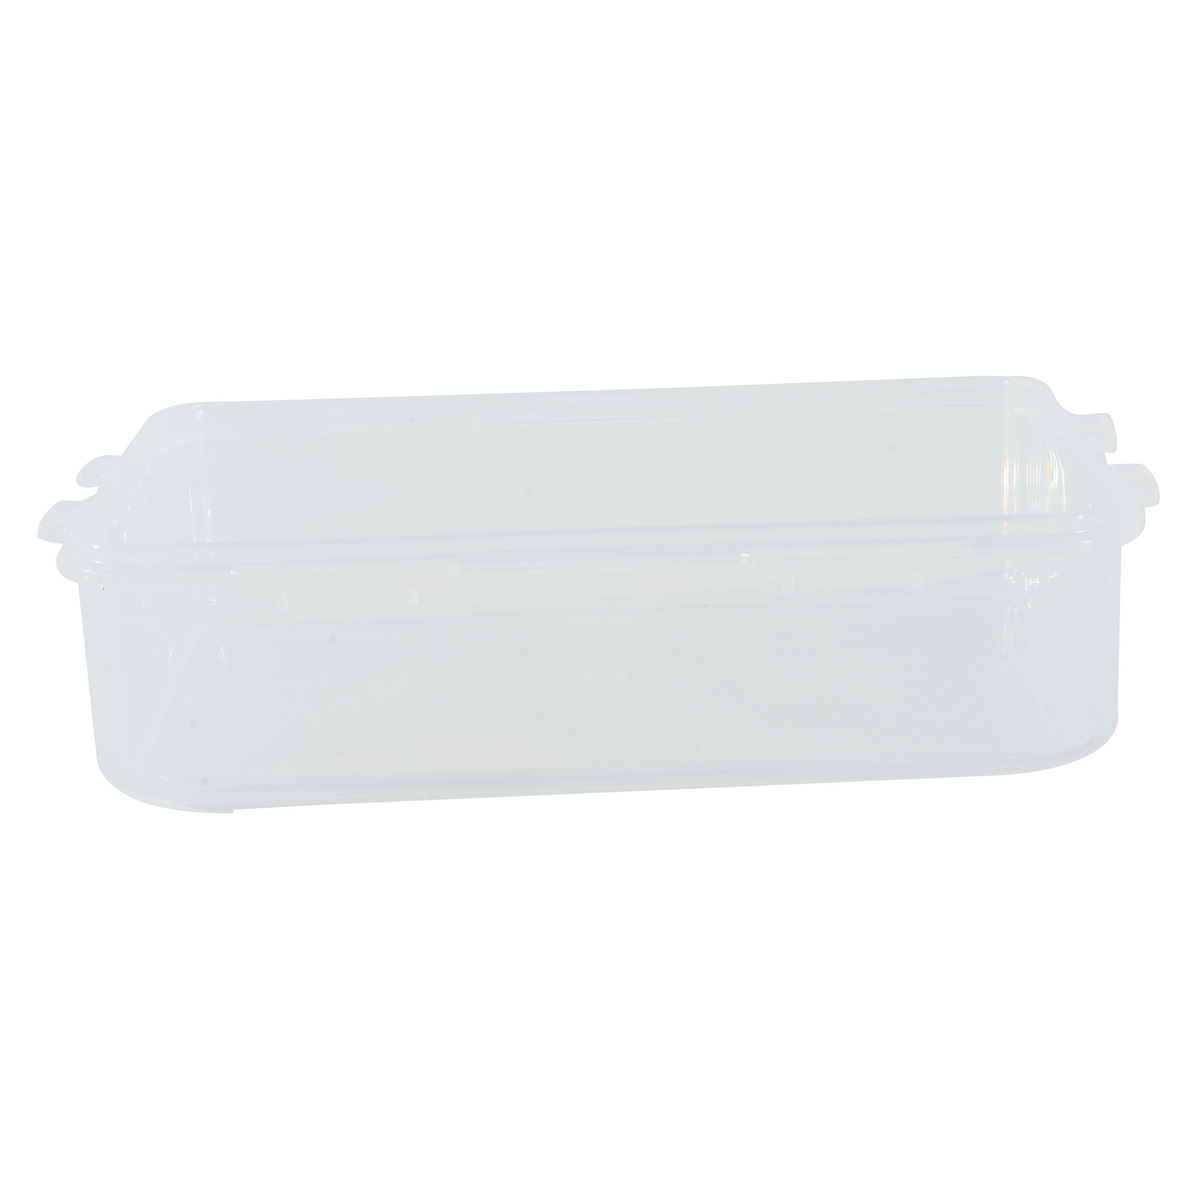 Lock & Lock Rectangular Food Container, 550 ml, Clear, HPL815 Online at  Best Price, Plastic containers